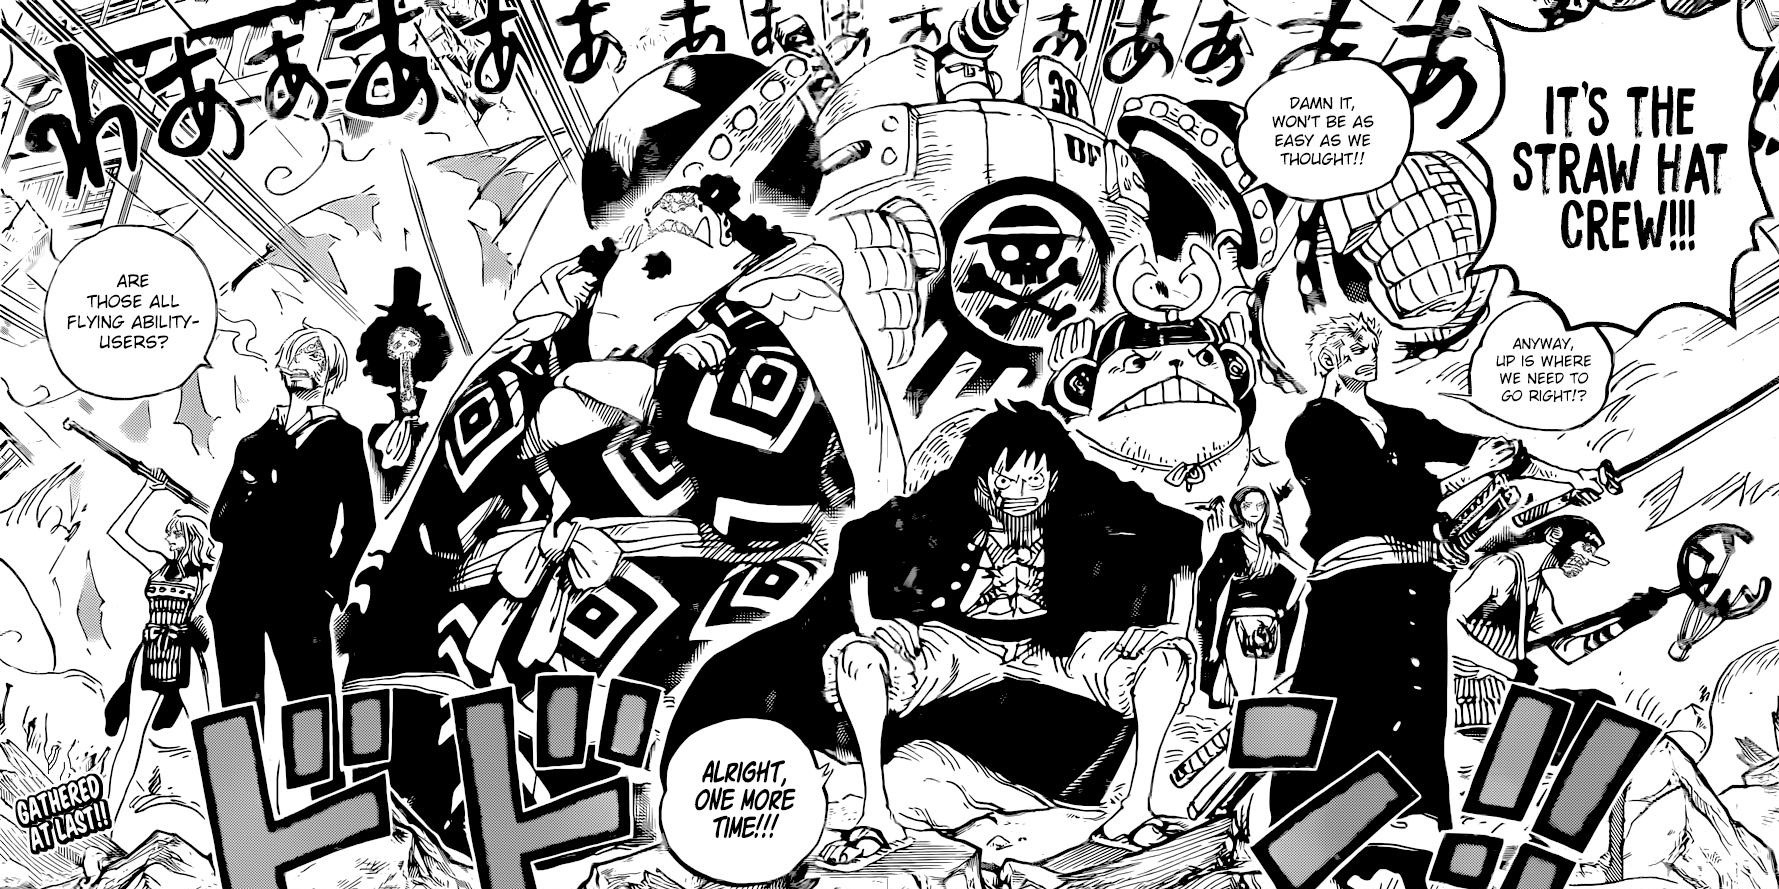 Straw Hats Pirates Reunion luffy and gang in samurai outfit in Wano before war in onigashima from one piece